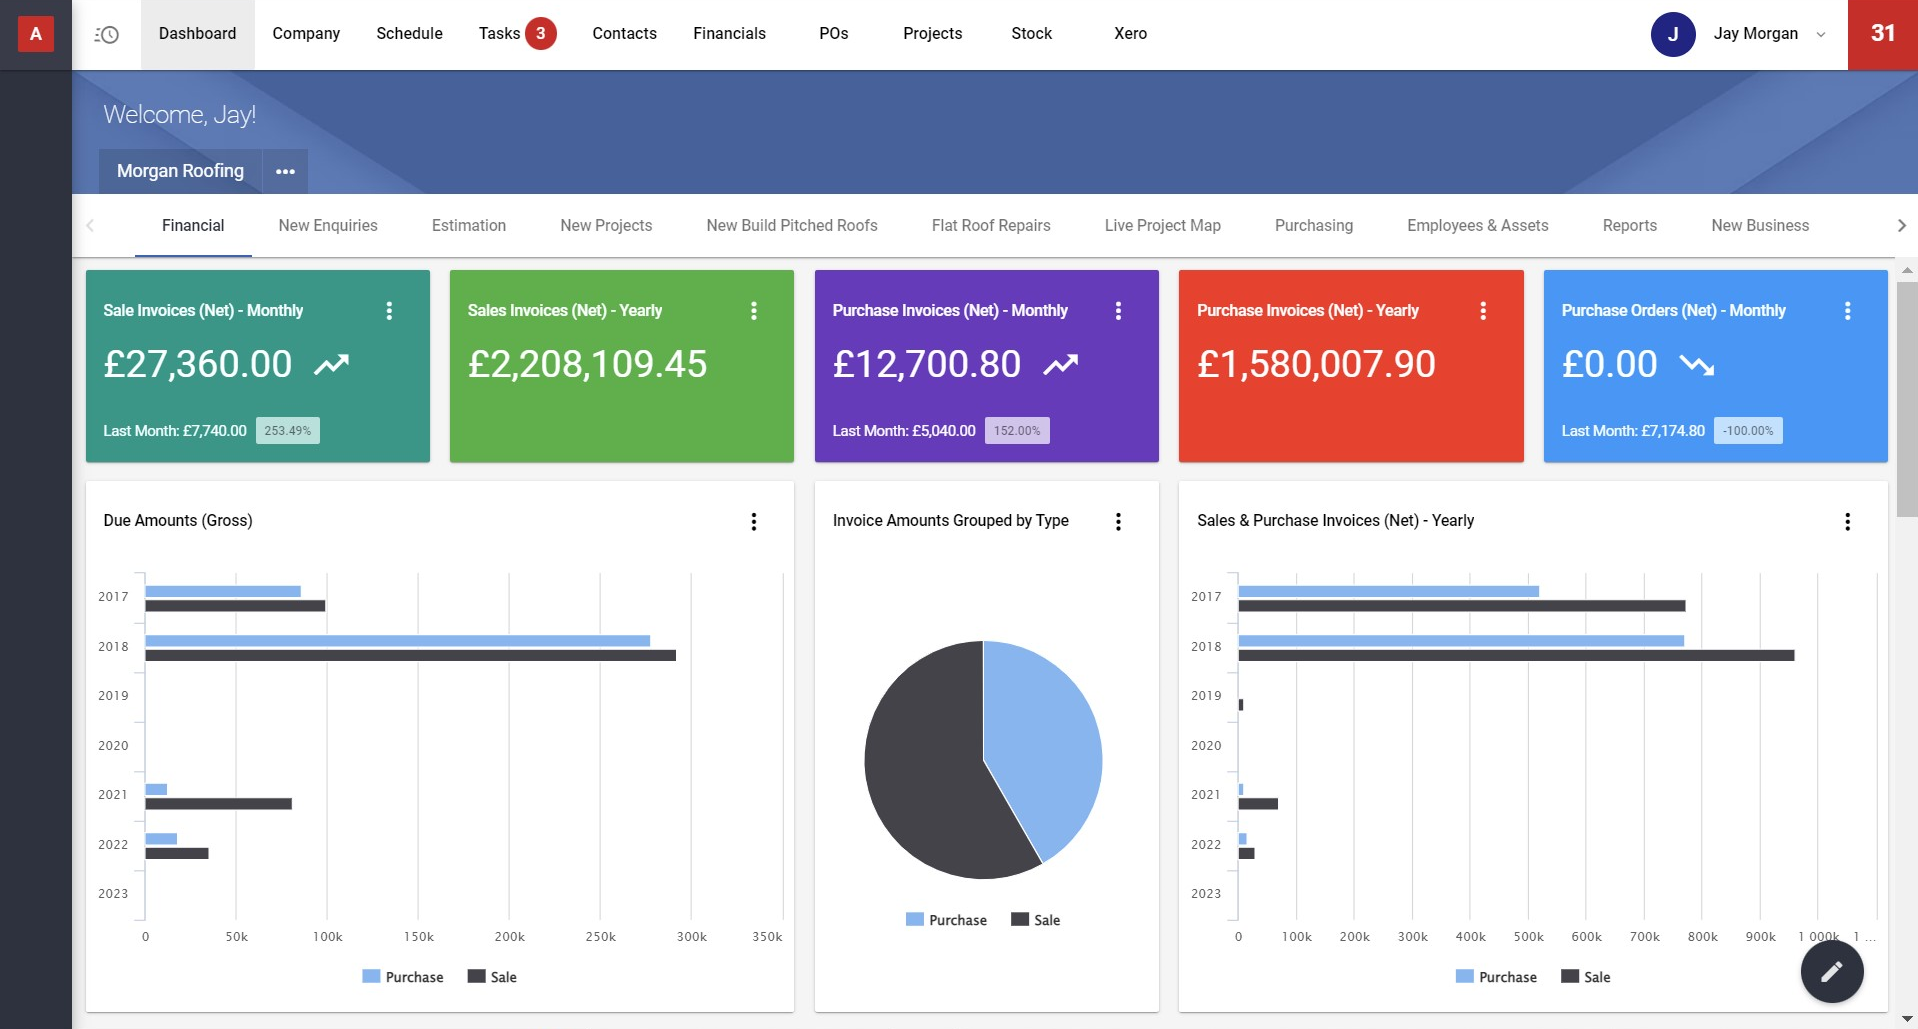 View on construction company financial indicators in Archdesk construction software